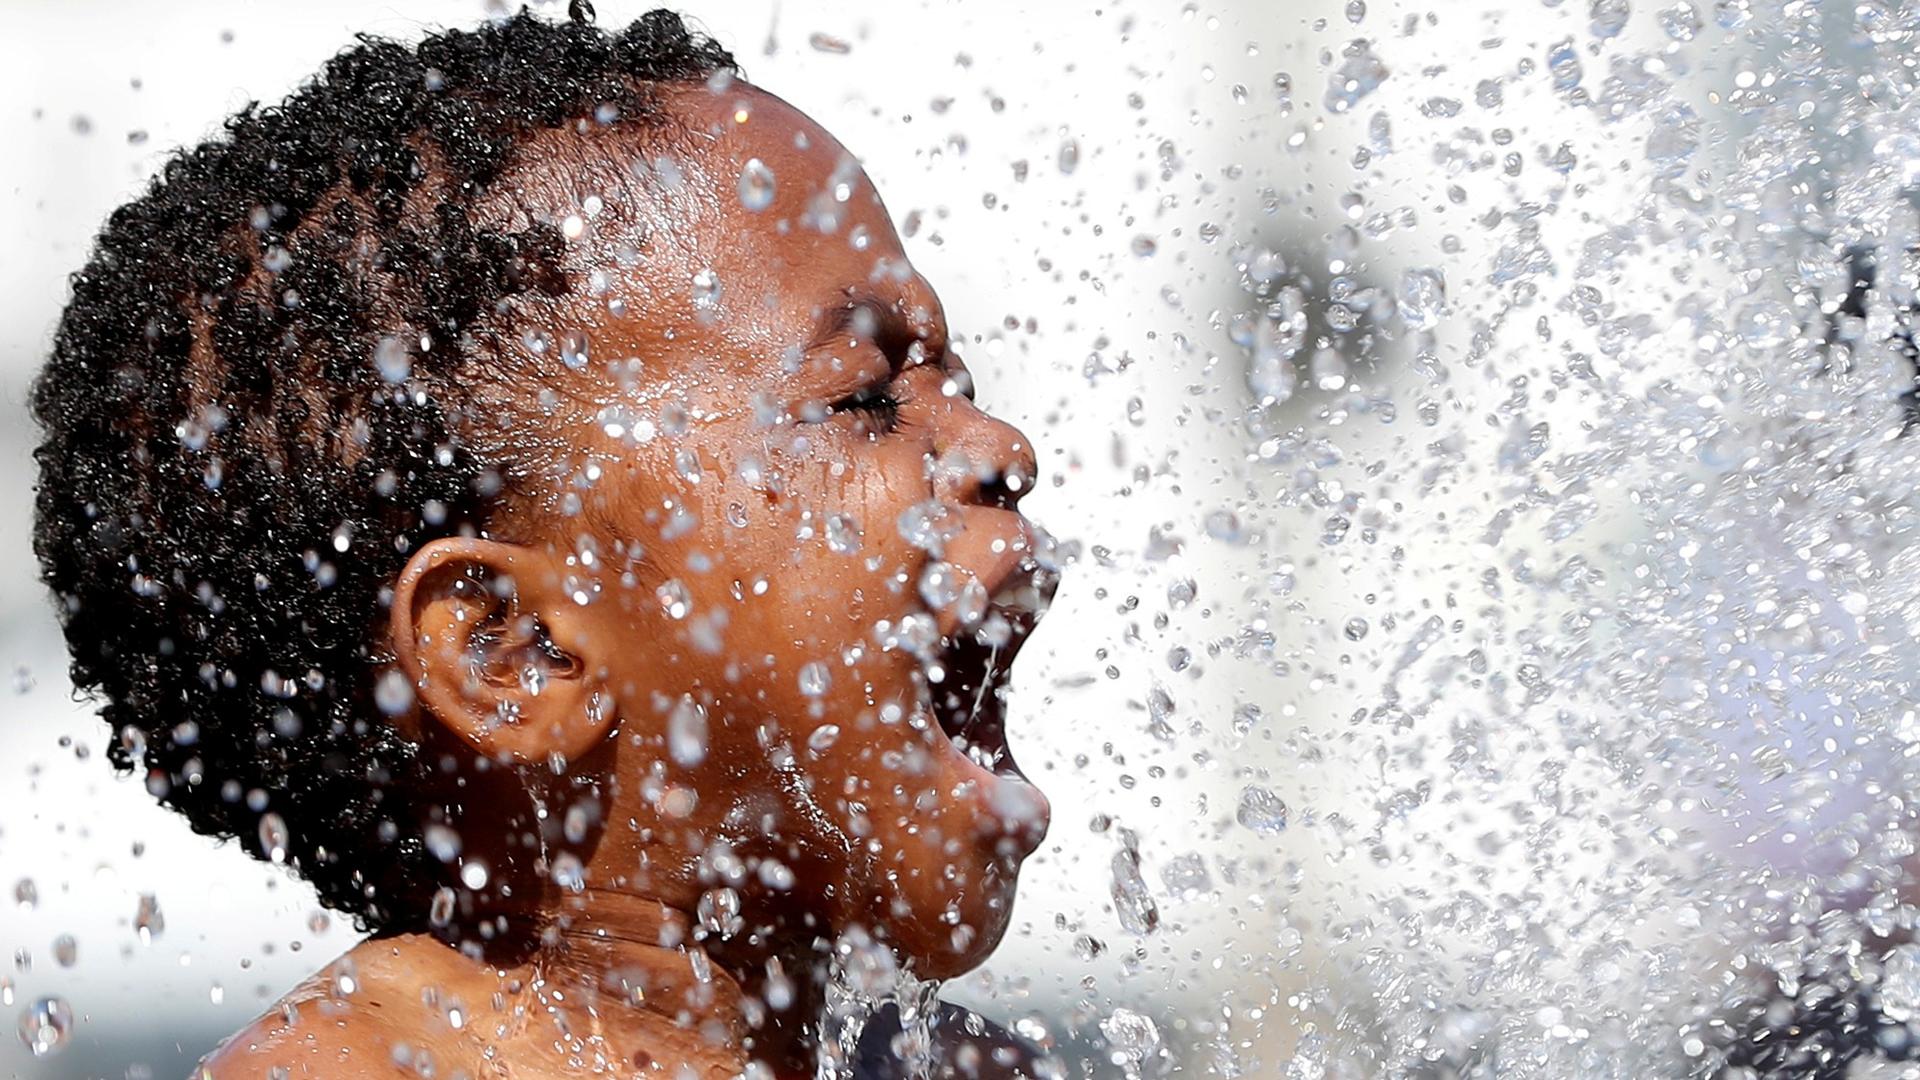 A close-up photo of a boy playing in a fountain in Brussels, Belgium.